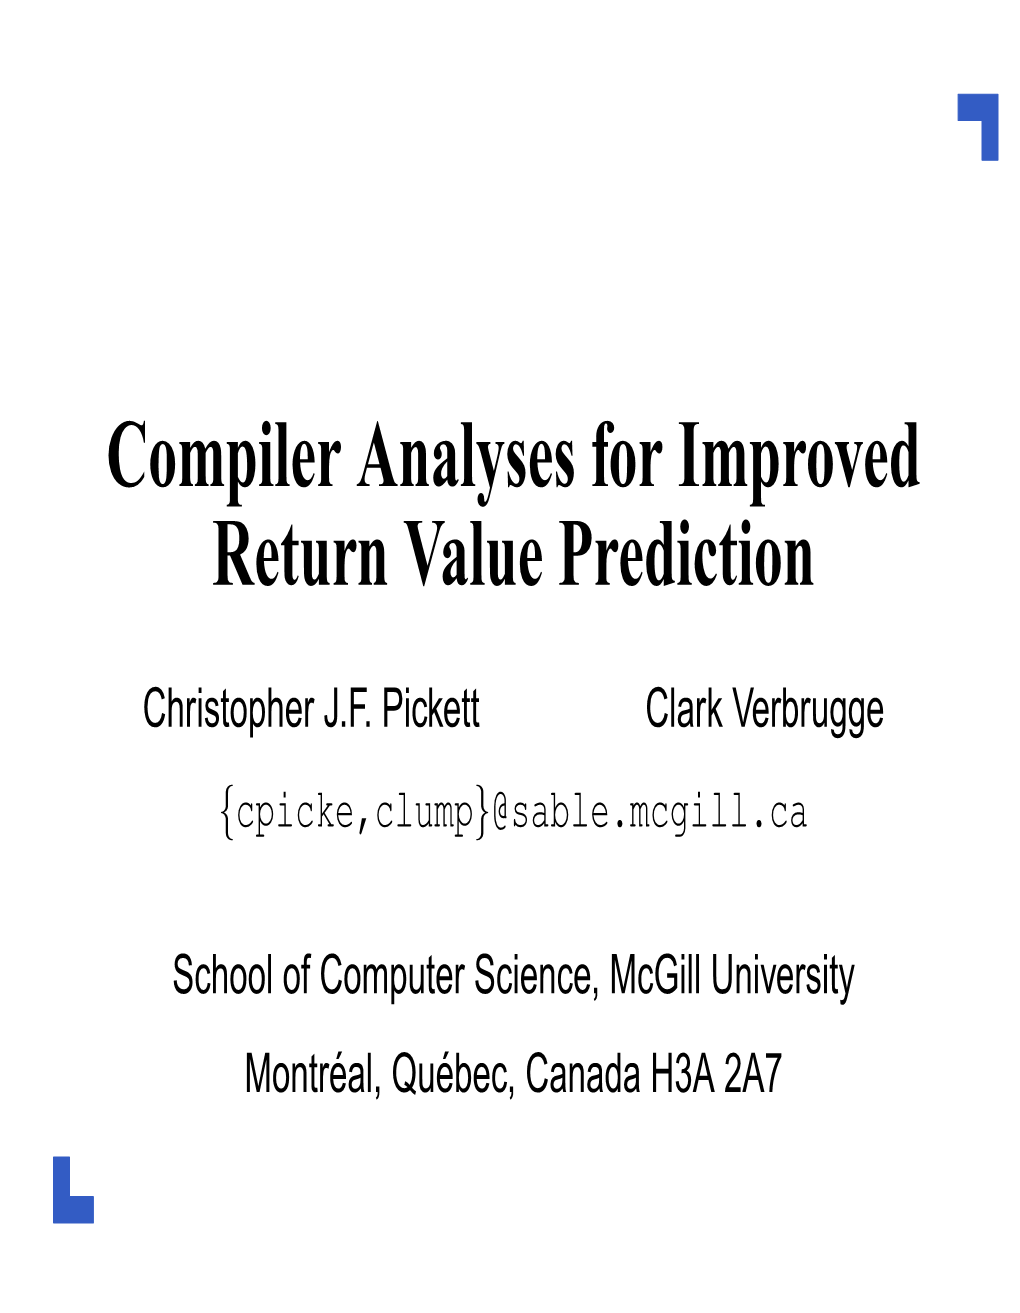 Compiler Analyses for Improved Return Value Prediction